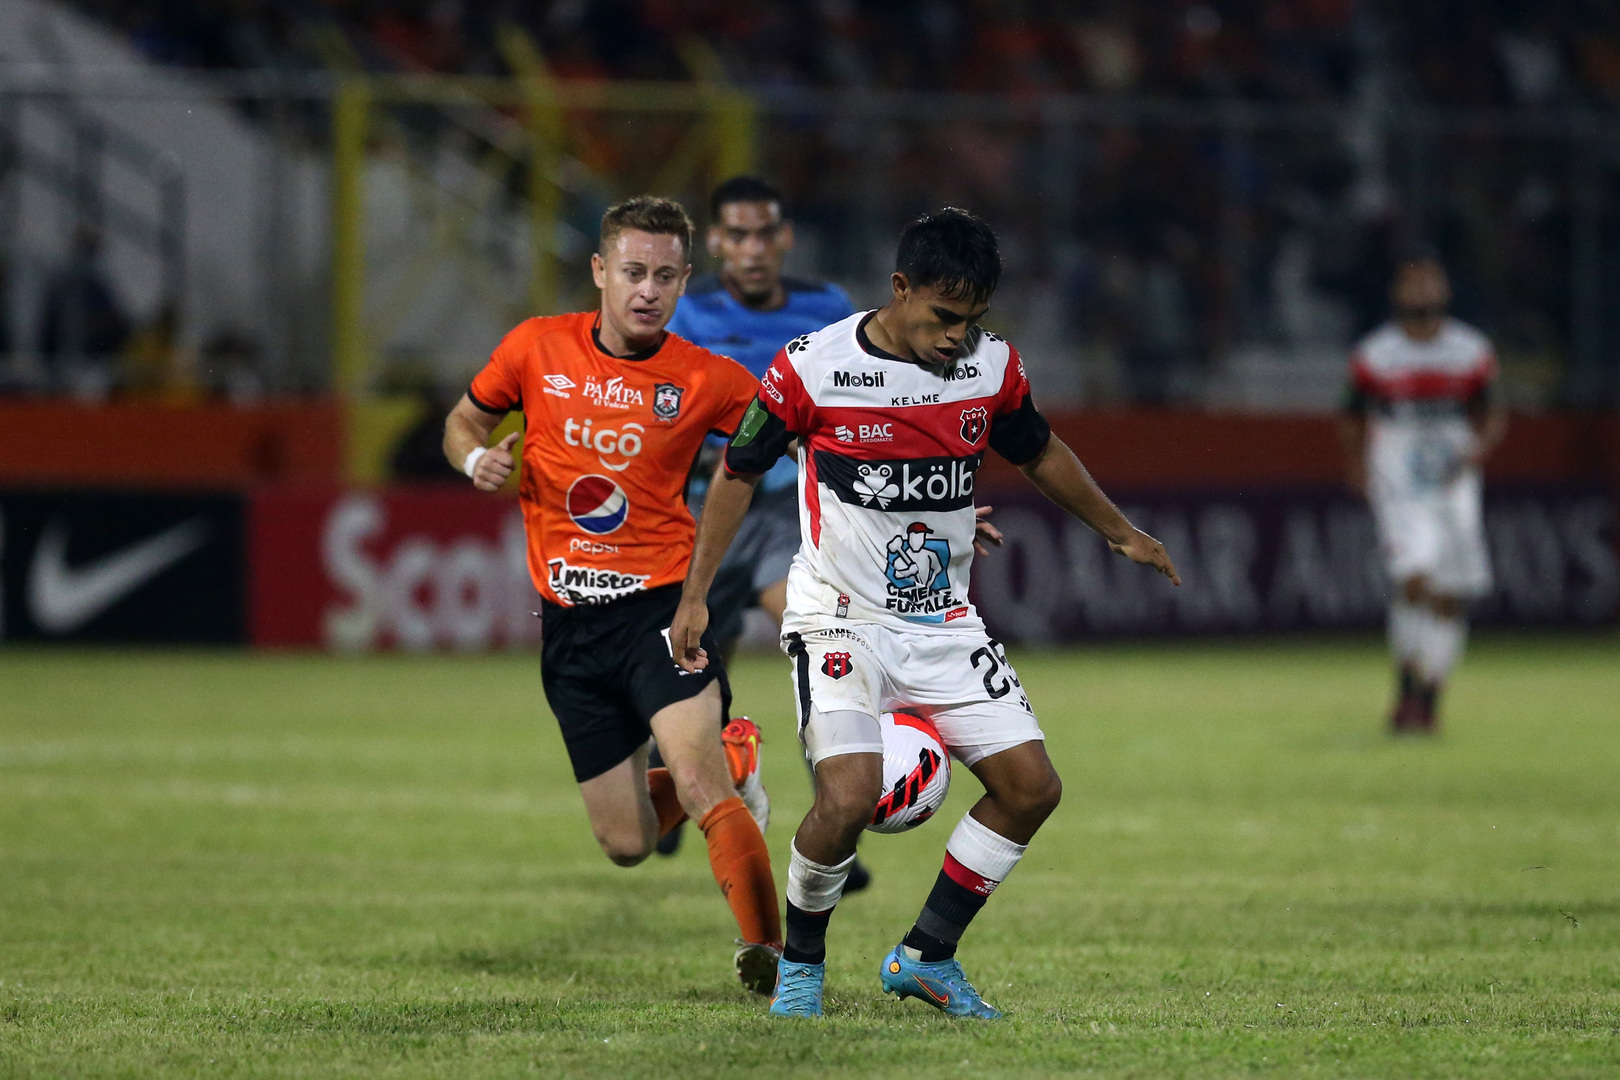 Felix’s late header rescues draw for Alajuelense at Aguila